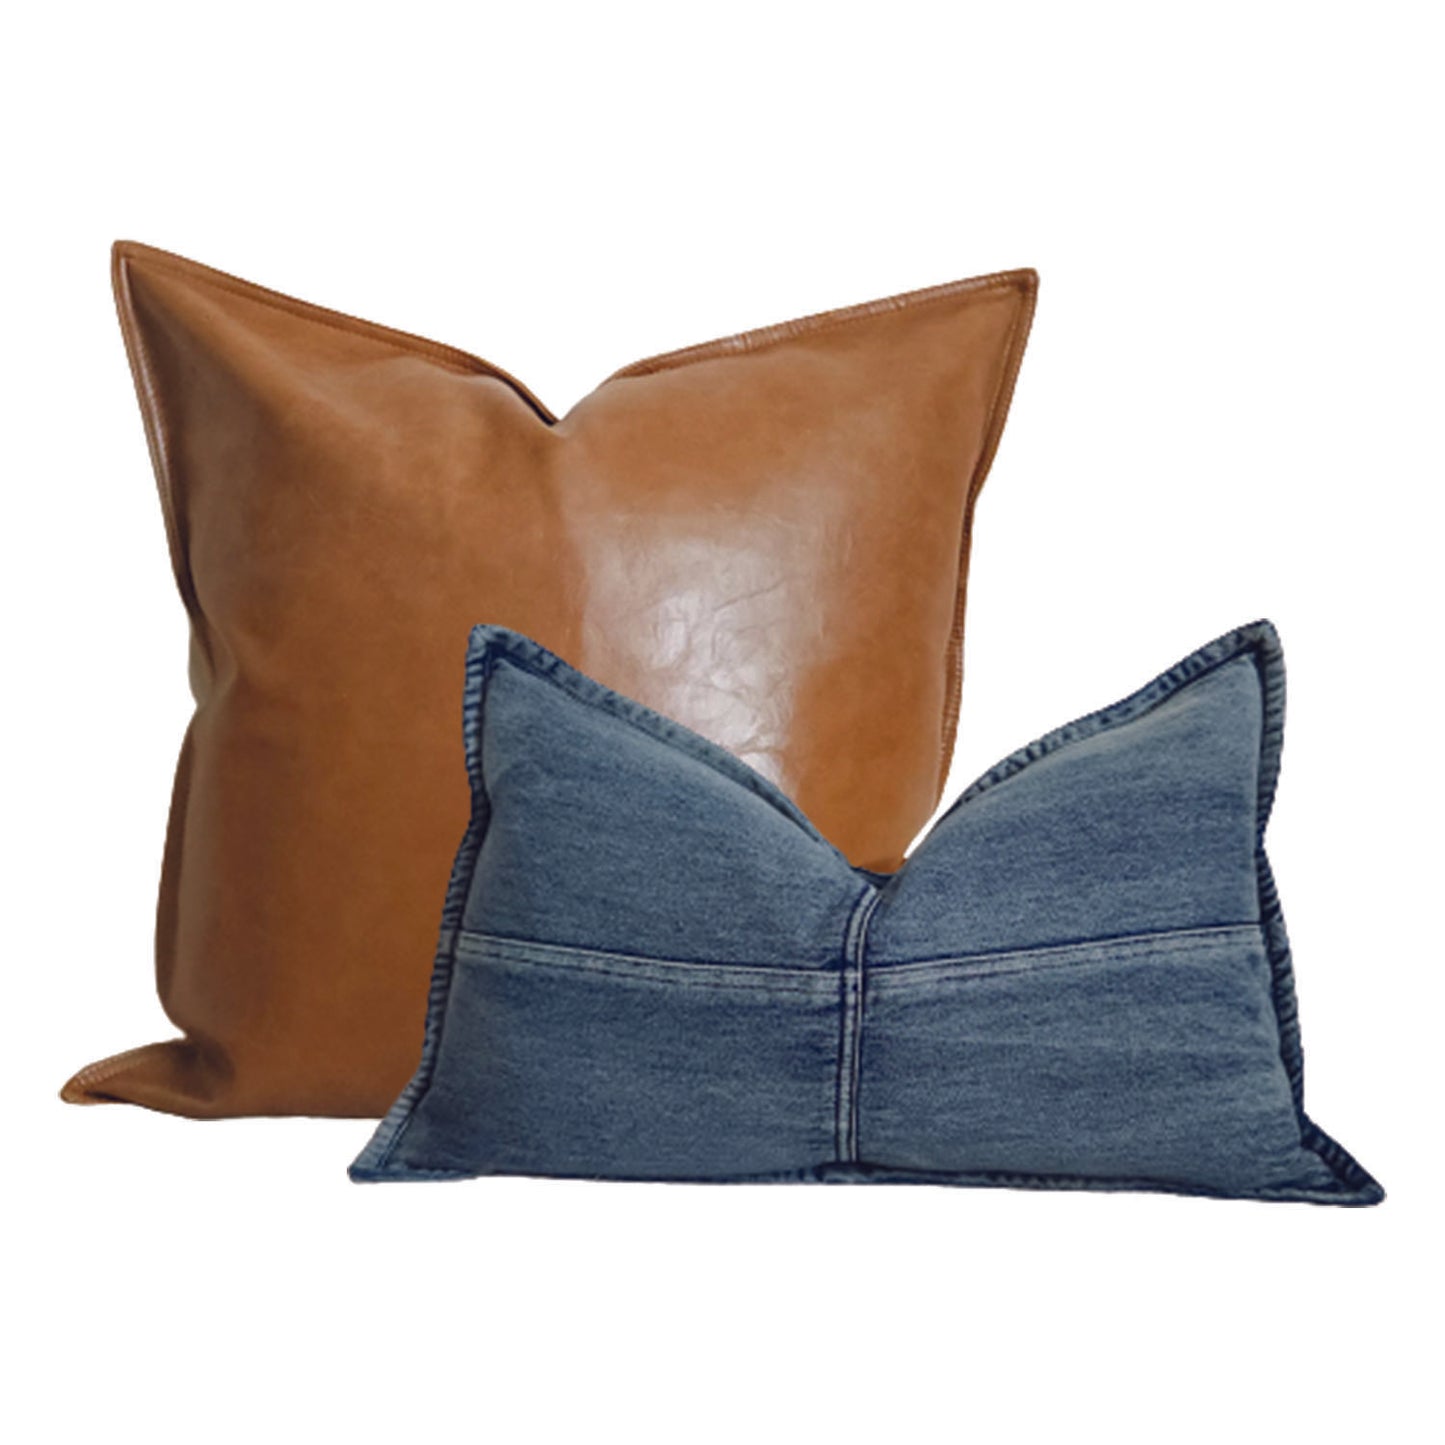 Daryl+Dixie Camel Faux Leather & Denim Rustic Coastal 2-Pack Throw Pillow Cover Bundle (Quick Ship)